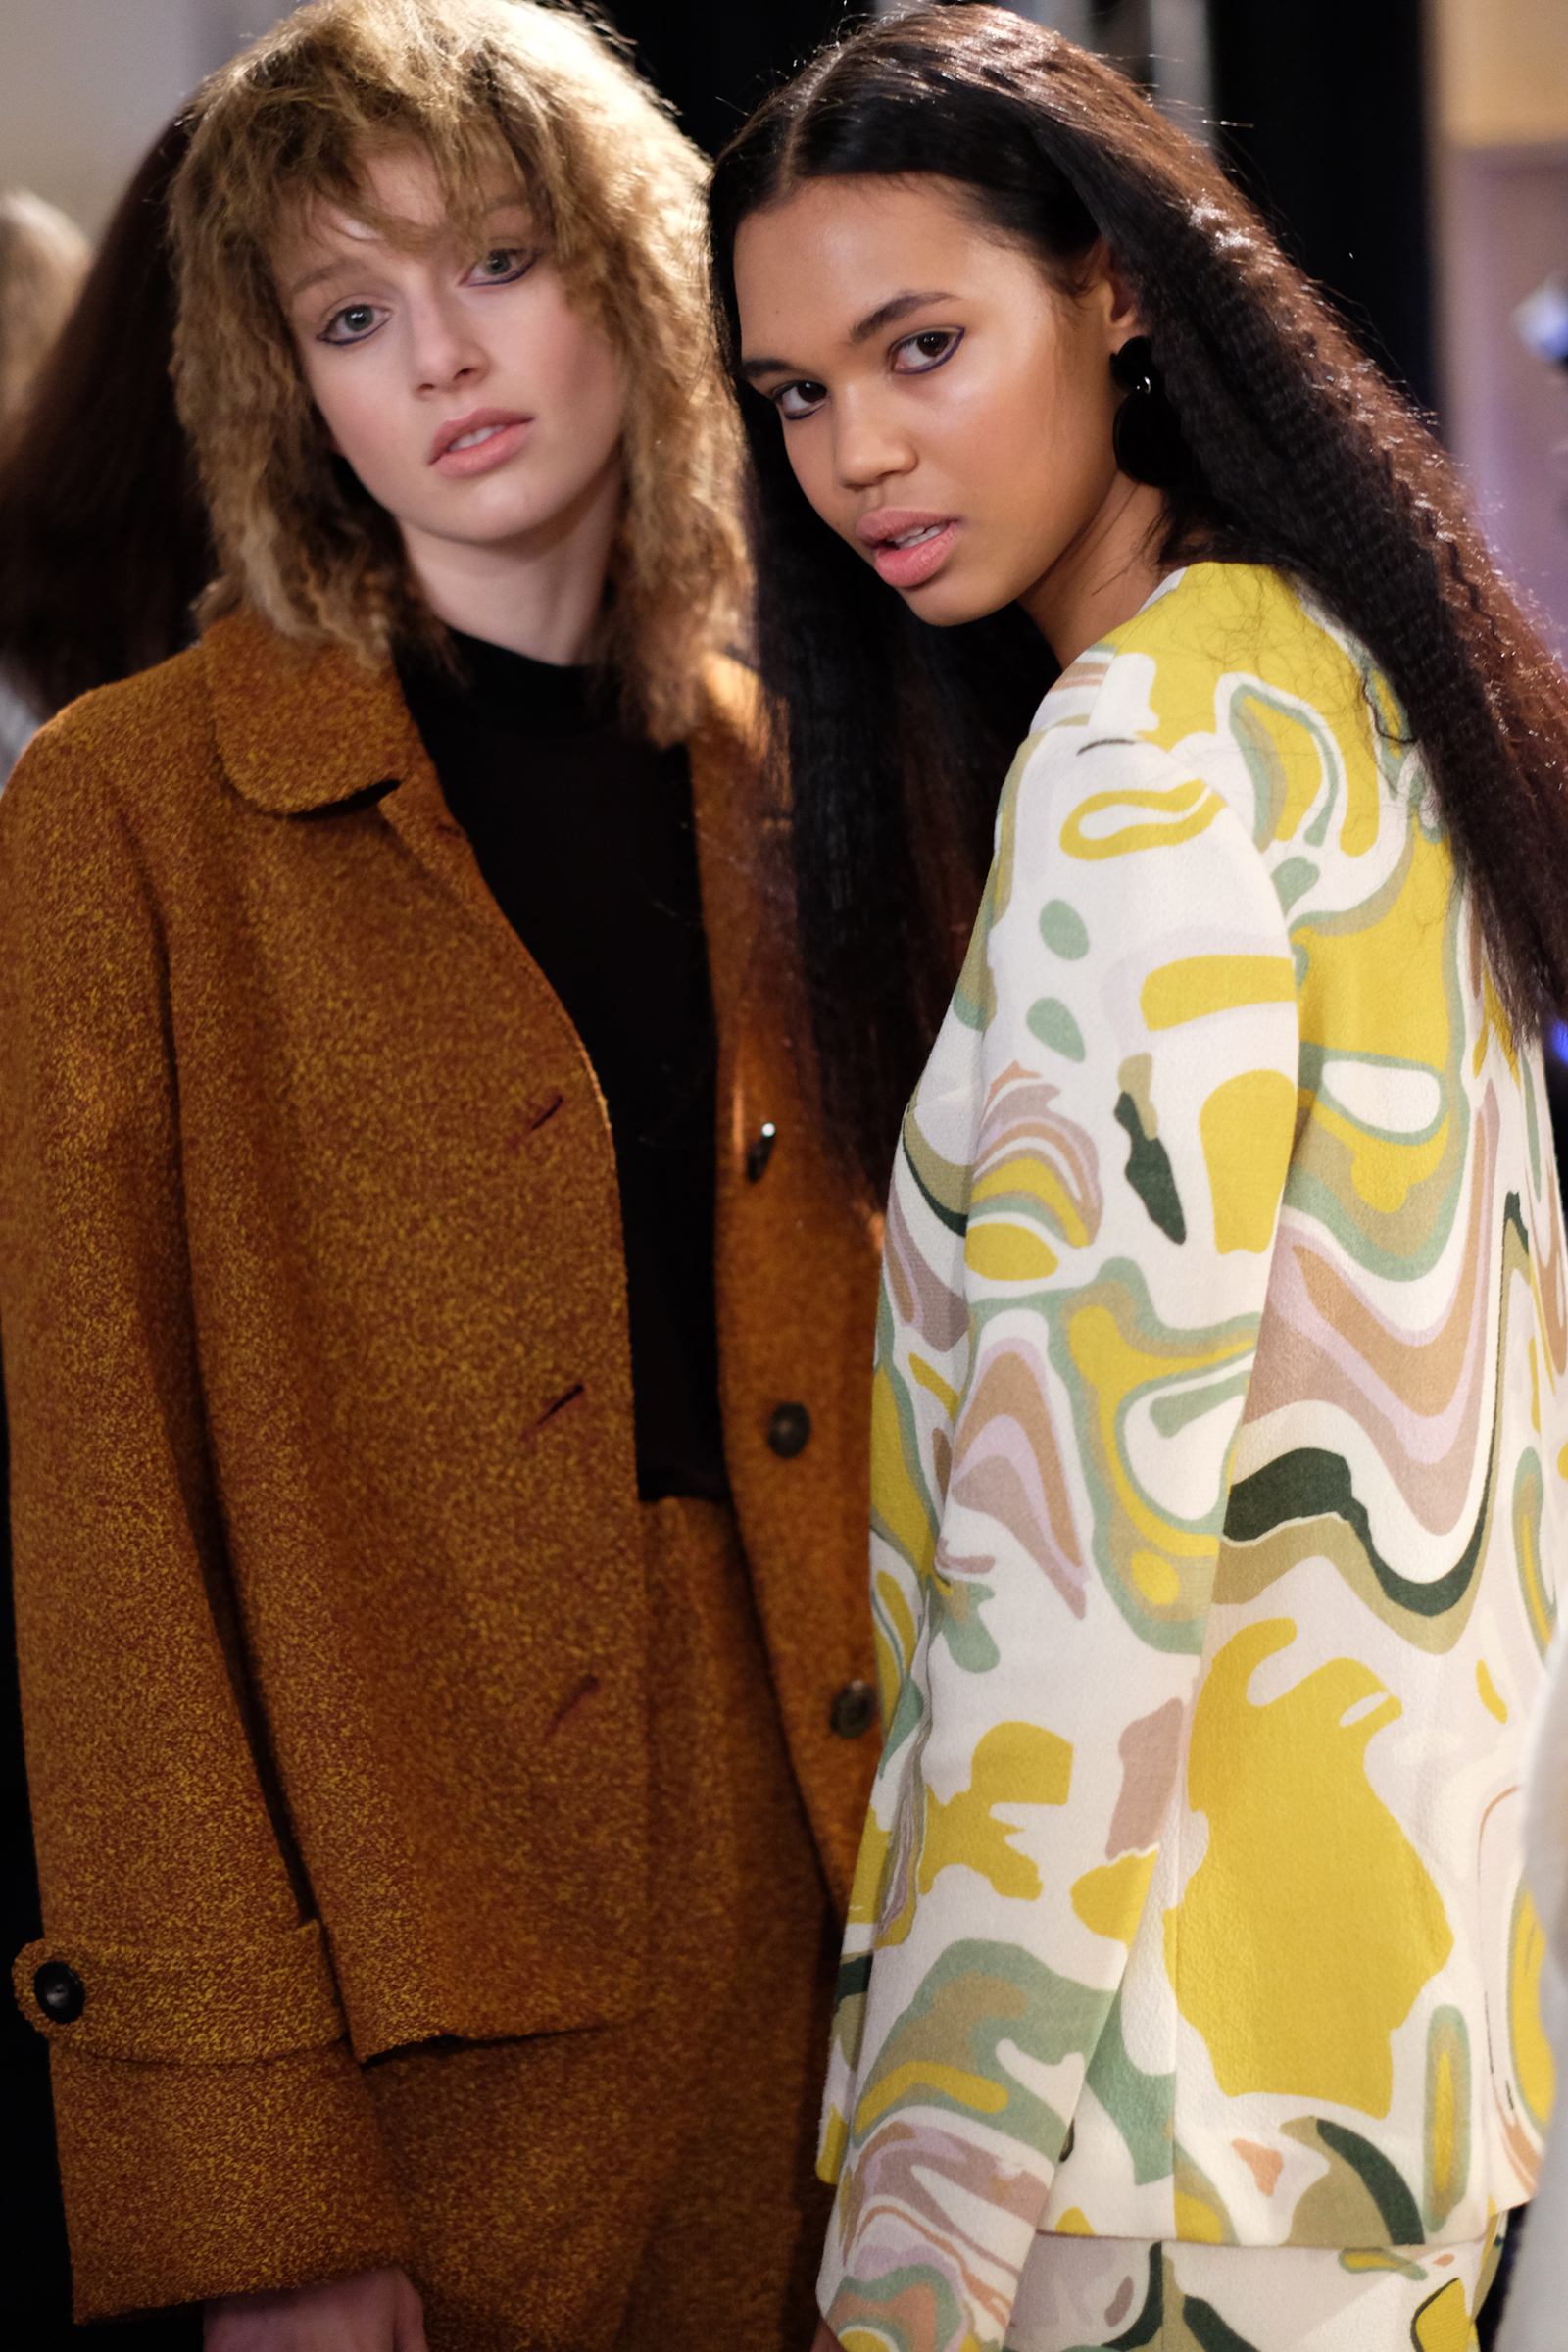 Tess Angel and Jordan backstage at Lucilla Gray's NZFW show | Chloe Hill Fashion Week Coverage 2016